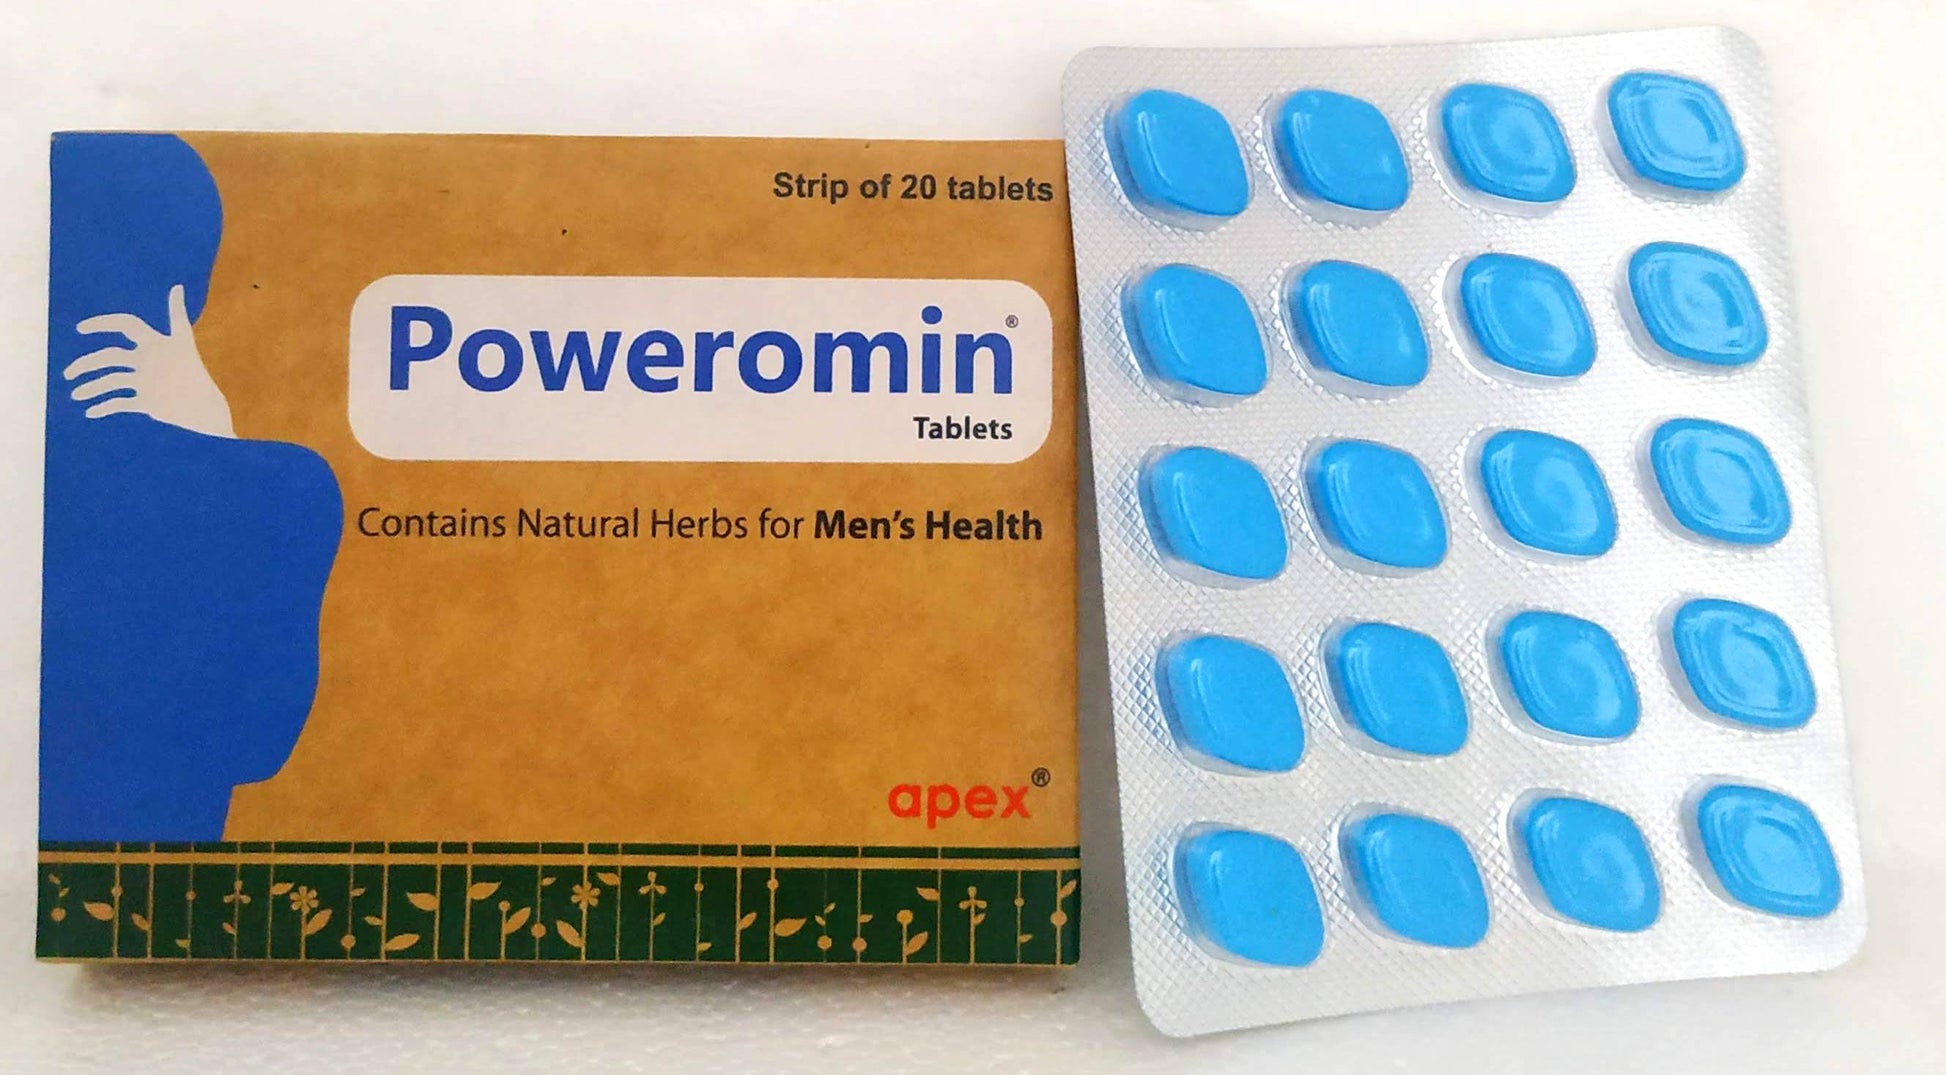 Shop Poweromin Tablets - 20Tablets at price 390.00 from Apex Ayurveda Online - Ayush Care